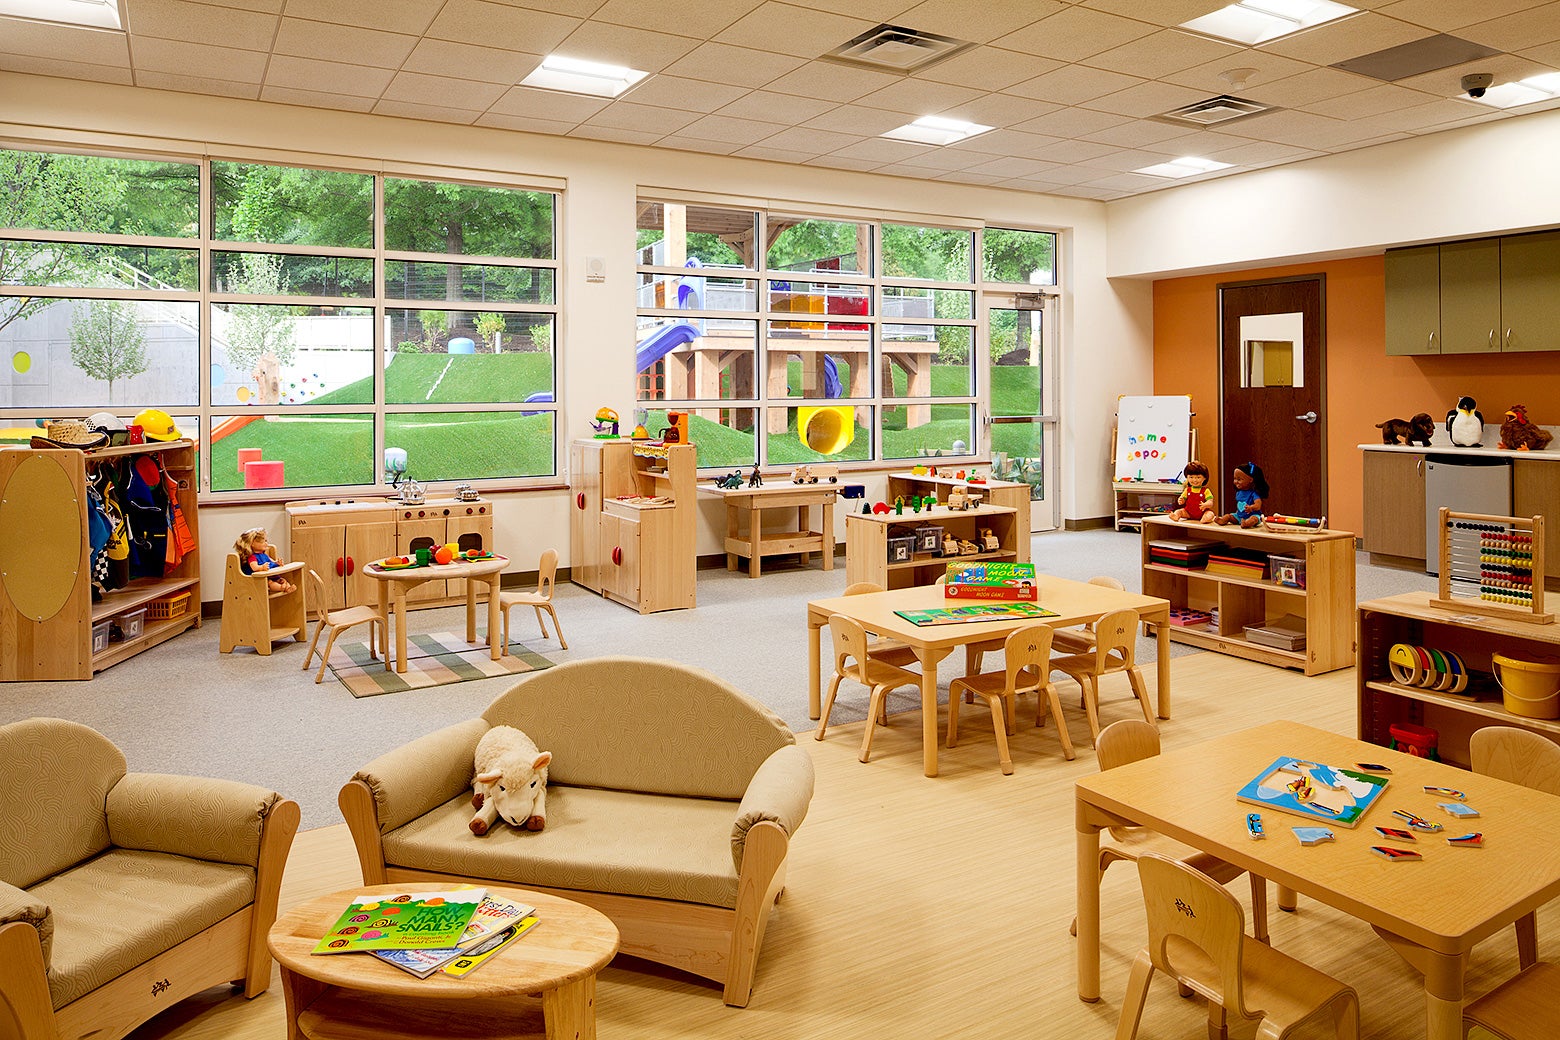 The state-of-the-art child care center that Home Depot built.